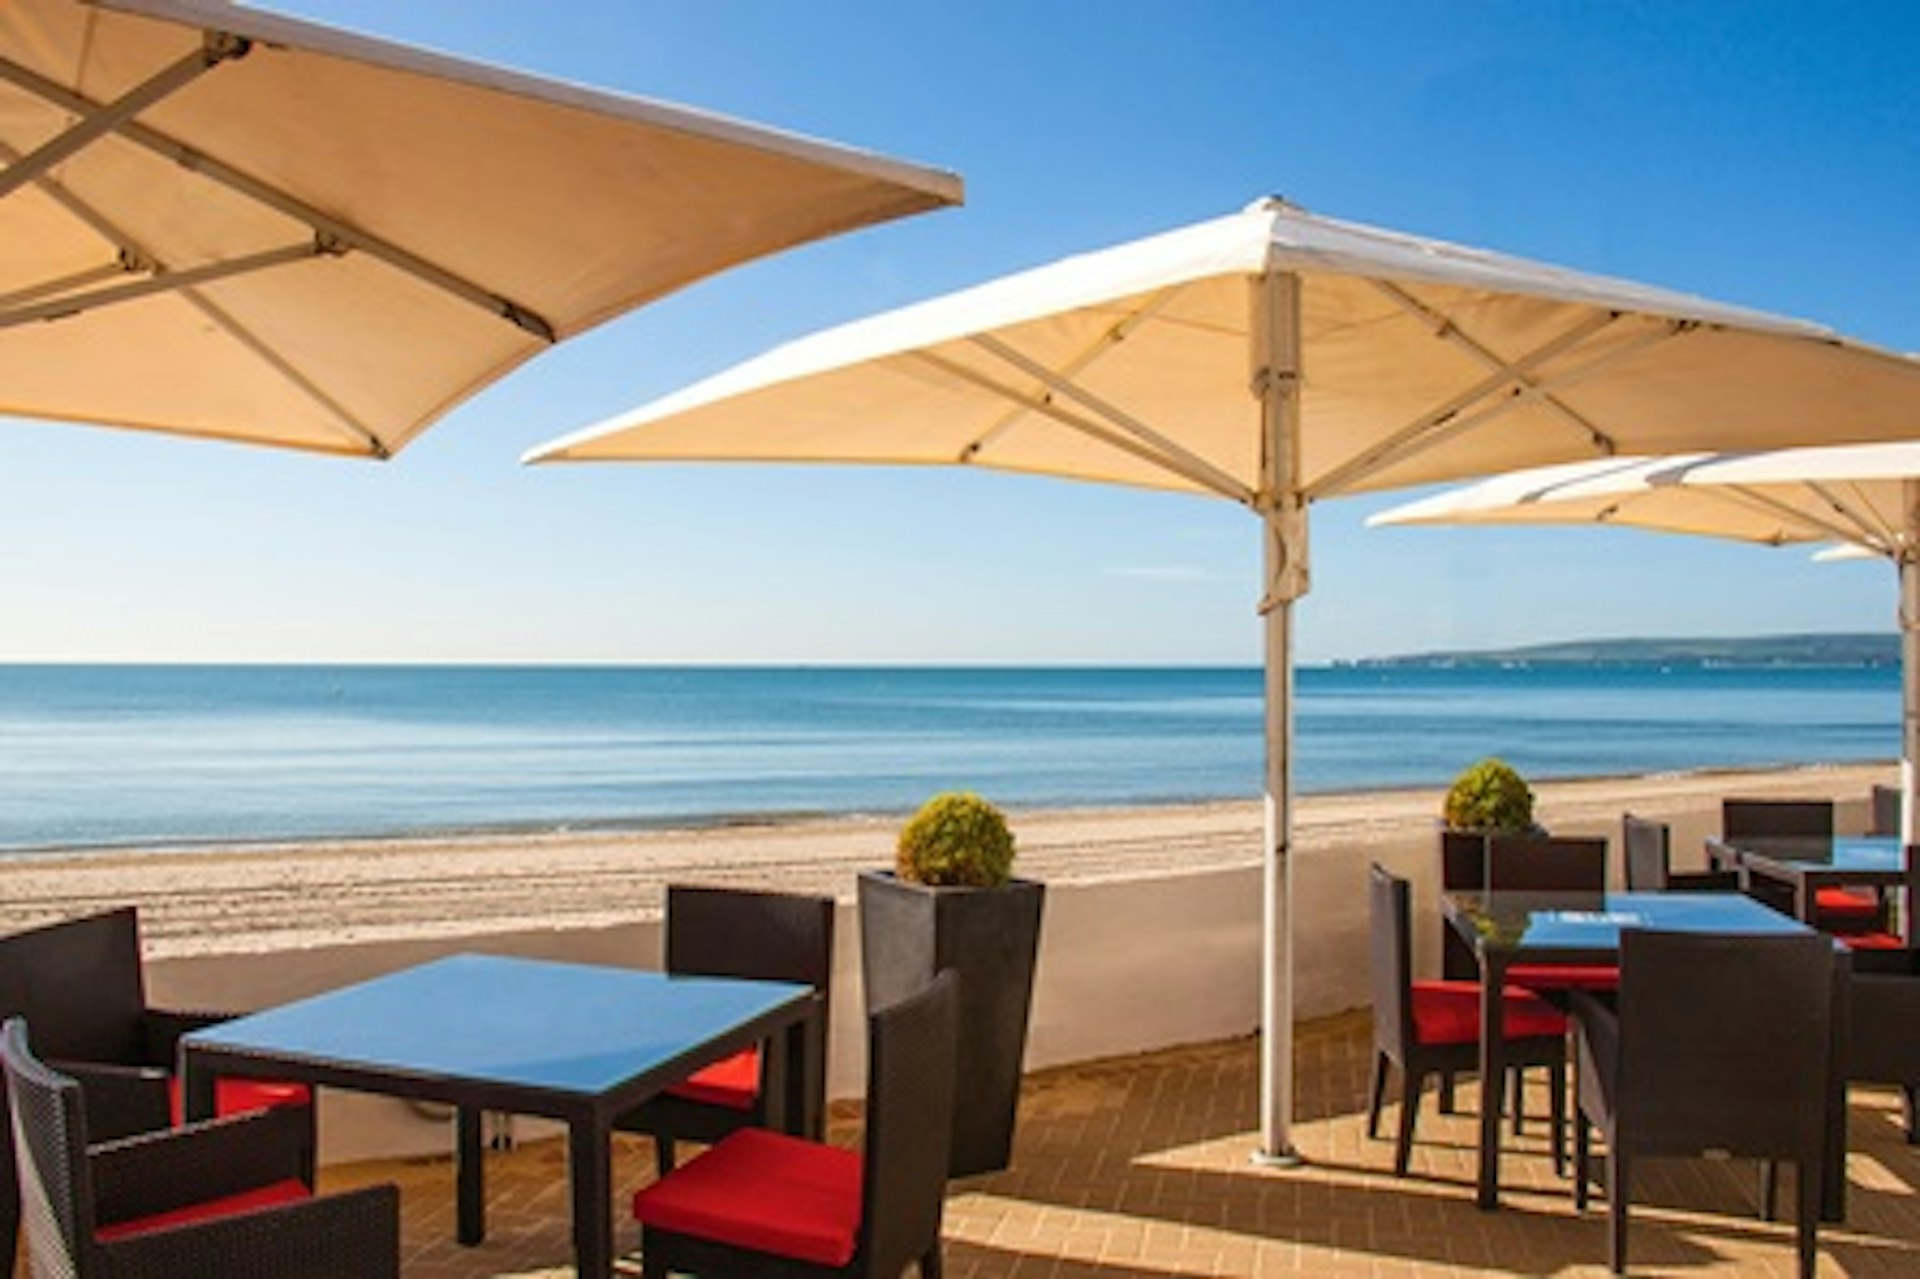 Two Night Break for Two at Sandbanks Hotel, Poole 2